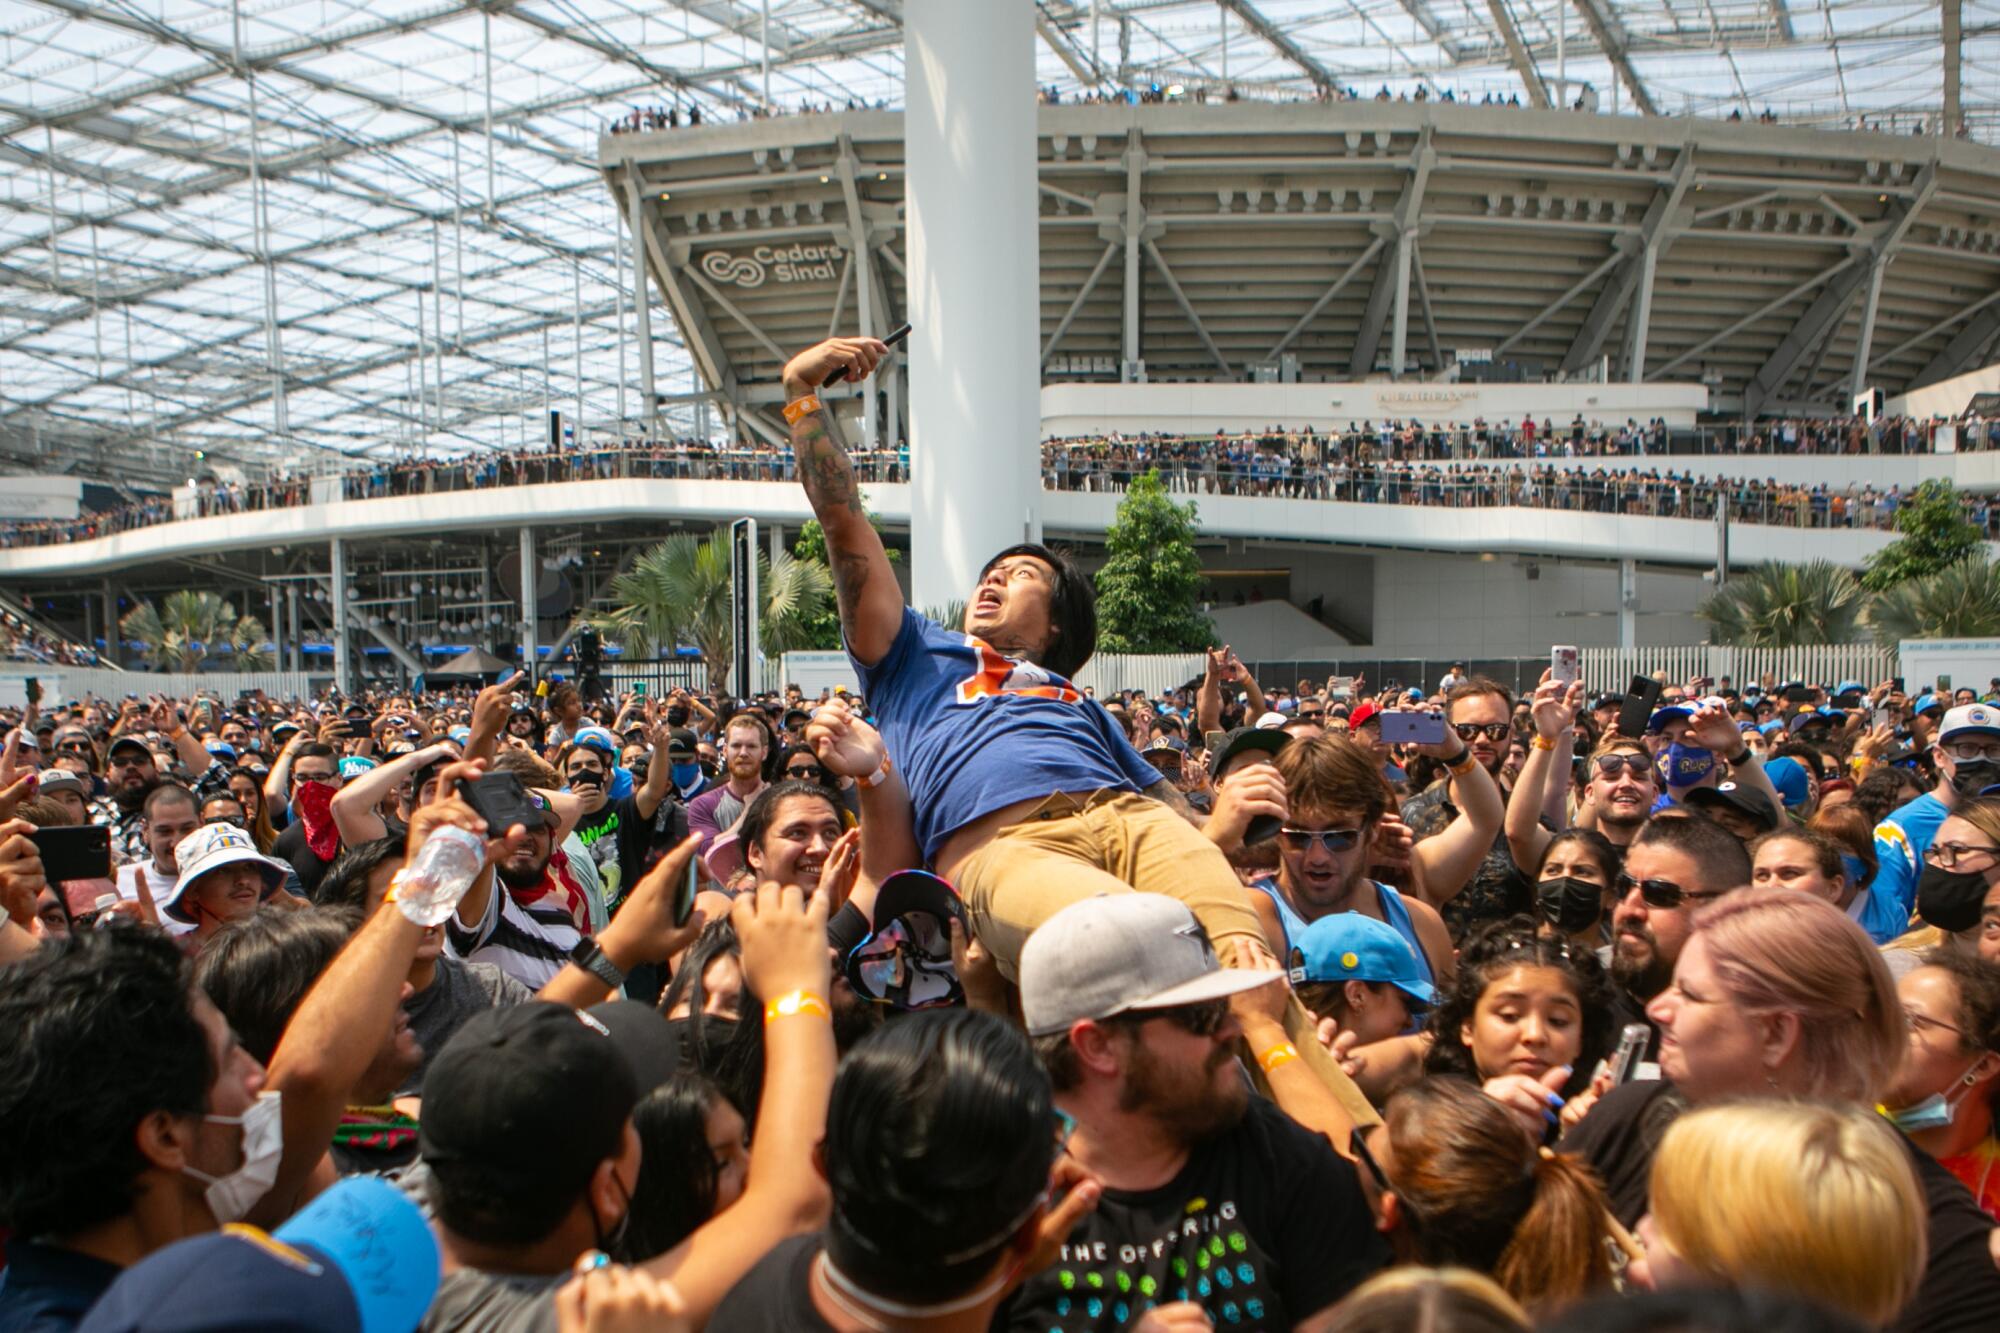 A spectator crowd surfs during a performance by The Offspring at the Charger Fan Fest on Sunday at SoFi Stadium.